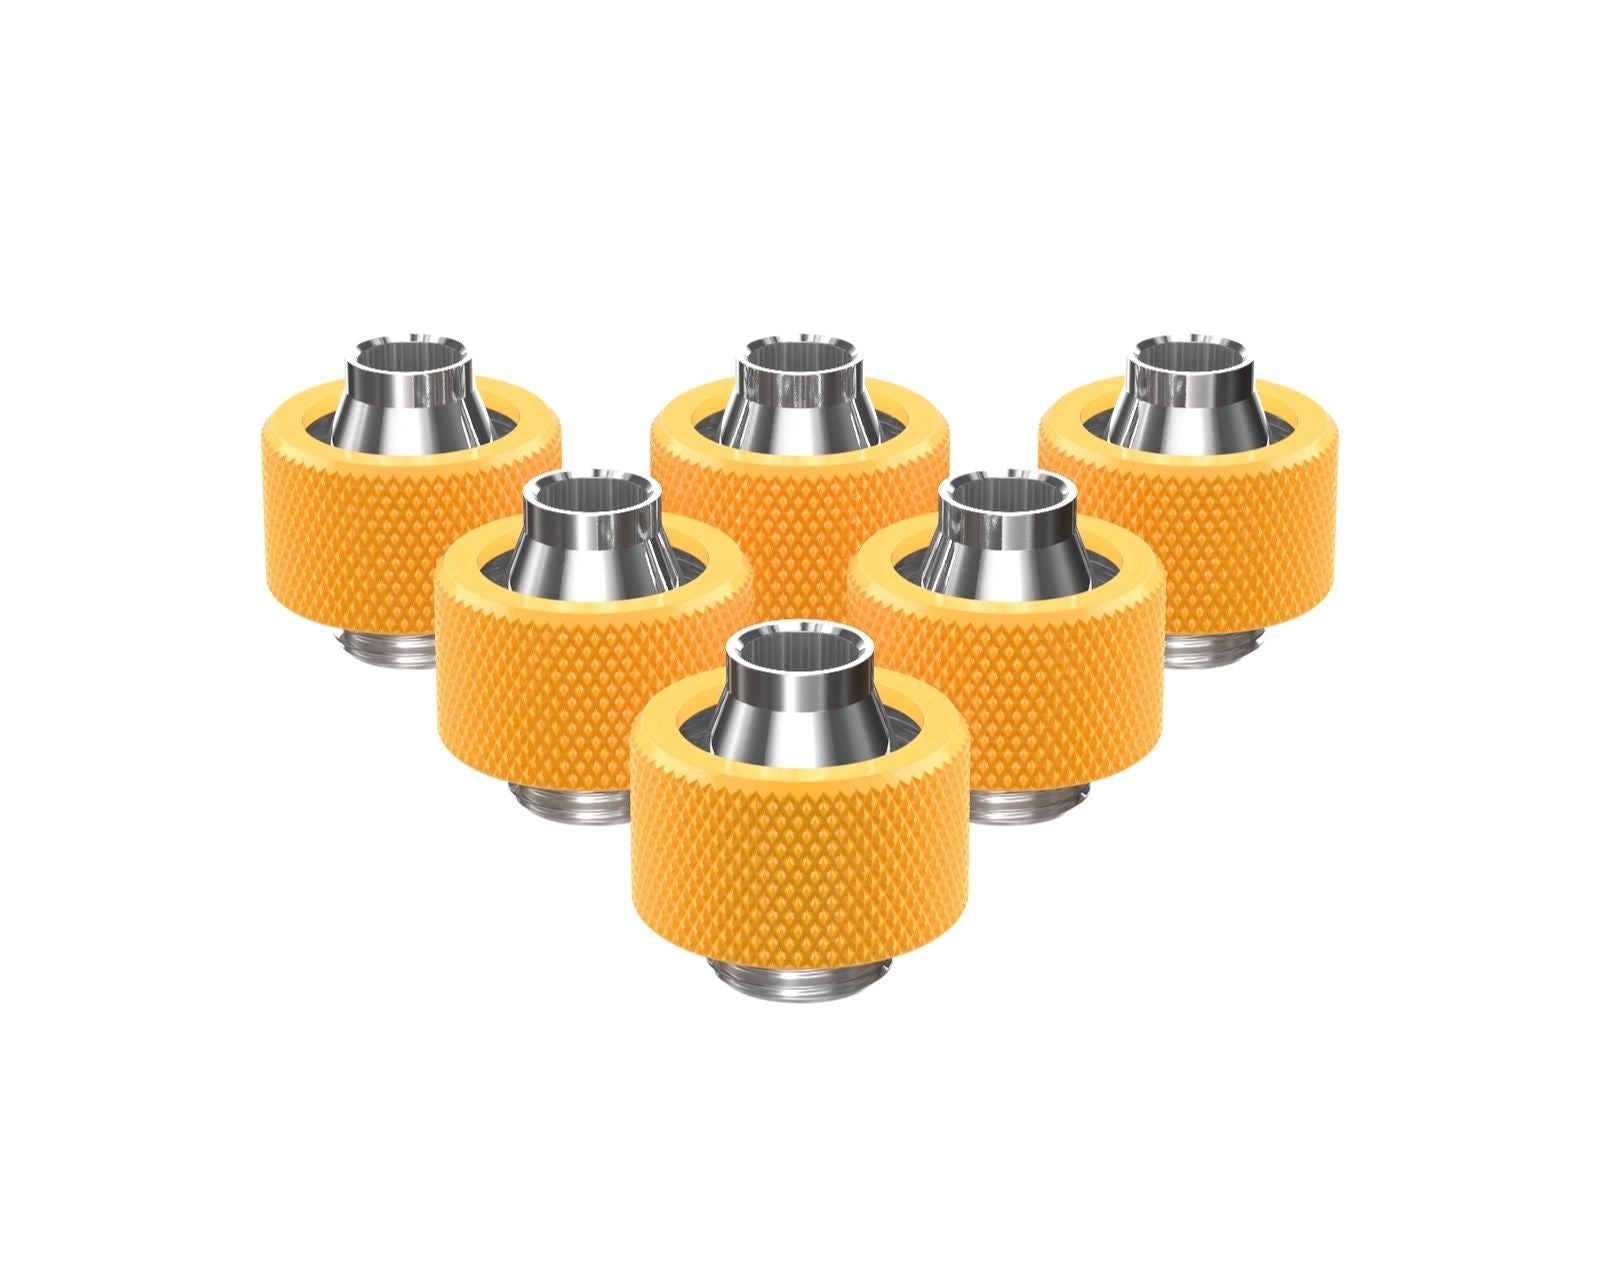 PrimoChill SecureFit SX - Premium Compression Fitting For 7/16in ID x 5/8in OD Flexible Tubing 6 Pack (F-SFSX758-6) - Available in 20+ Colors, Custom Watercooling Loop Ready - Yellow